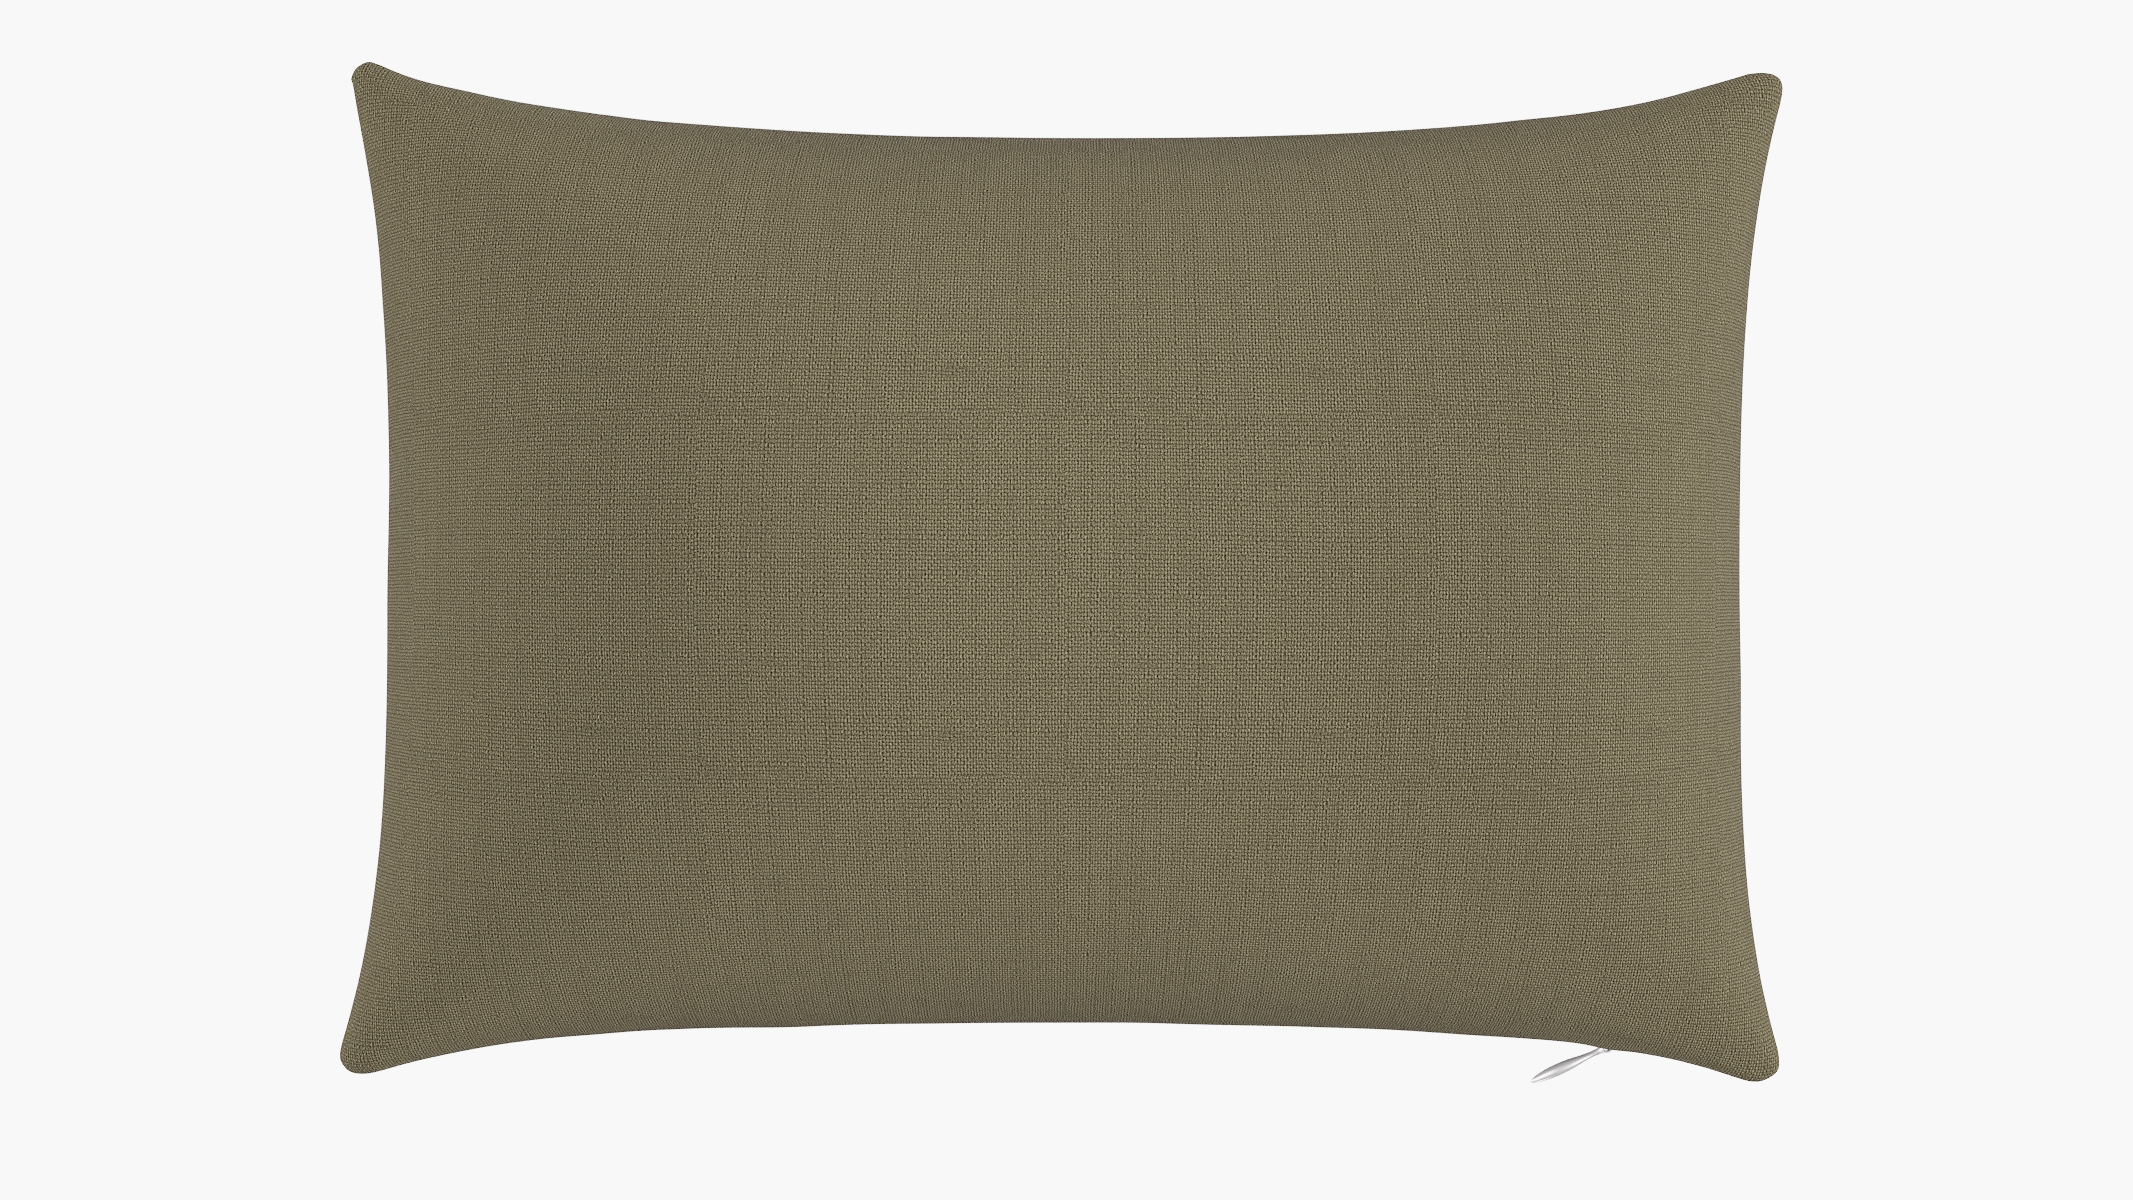 Throw Pillow 14" x 20", Olive Everyday Linen, 14" x 20" - Image 0